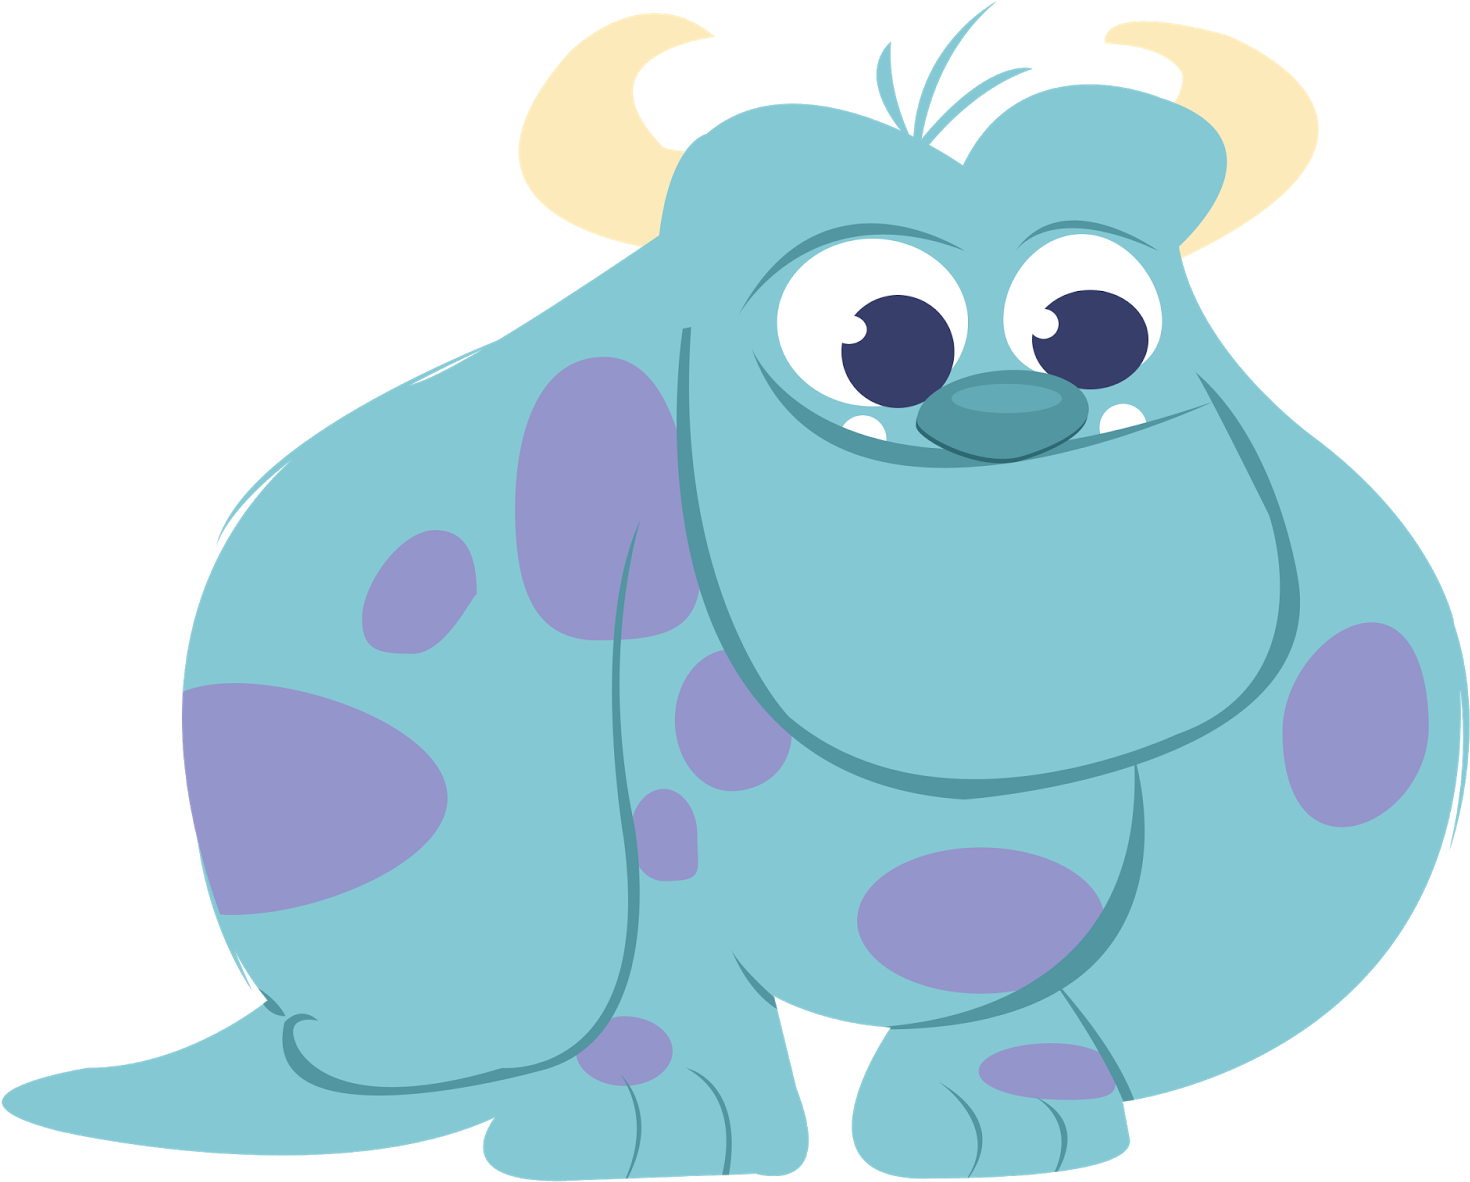 Download and share clipart about Mike Wazowski Randall Boggs Monsters, Inc ...